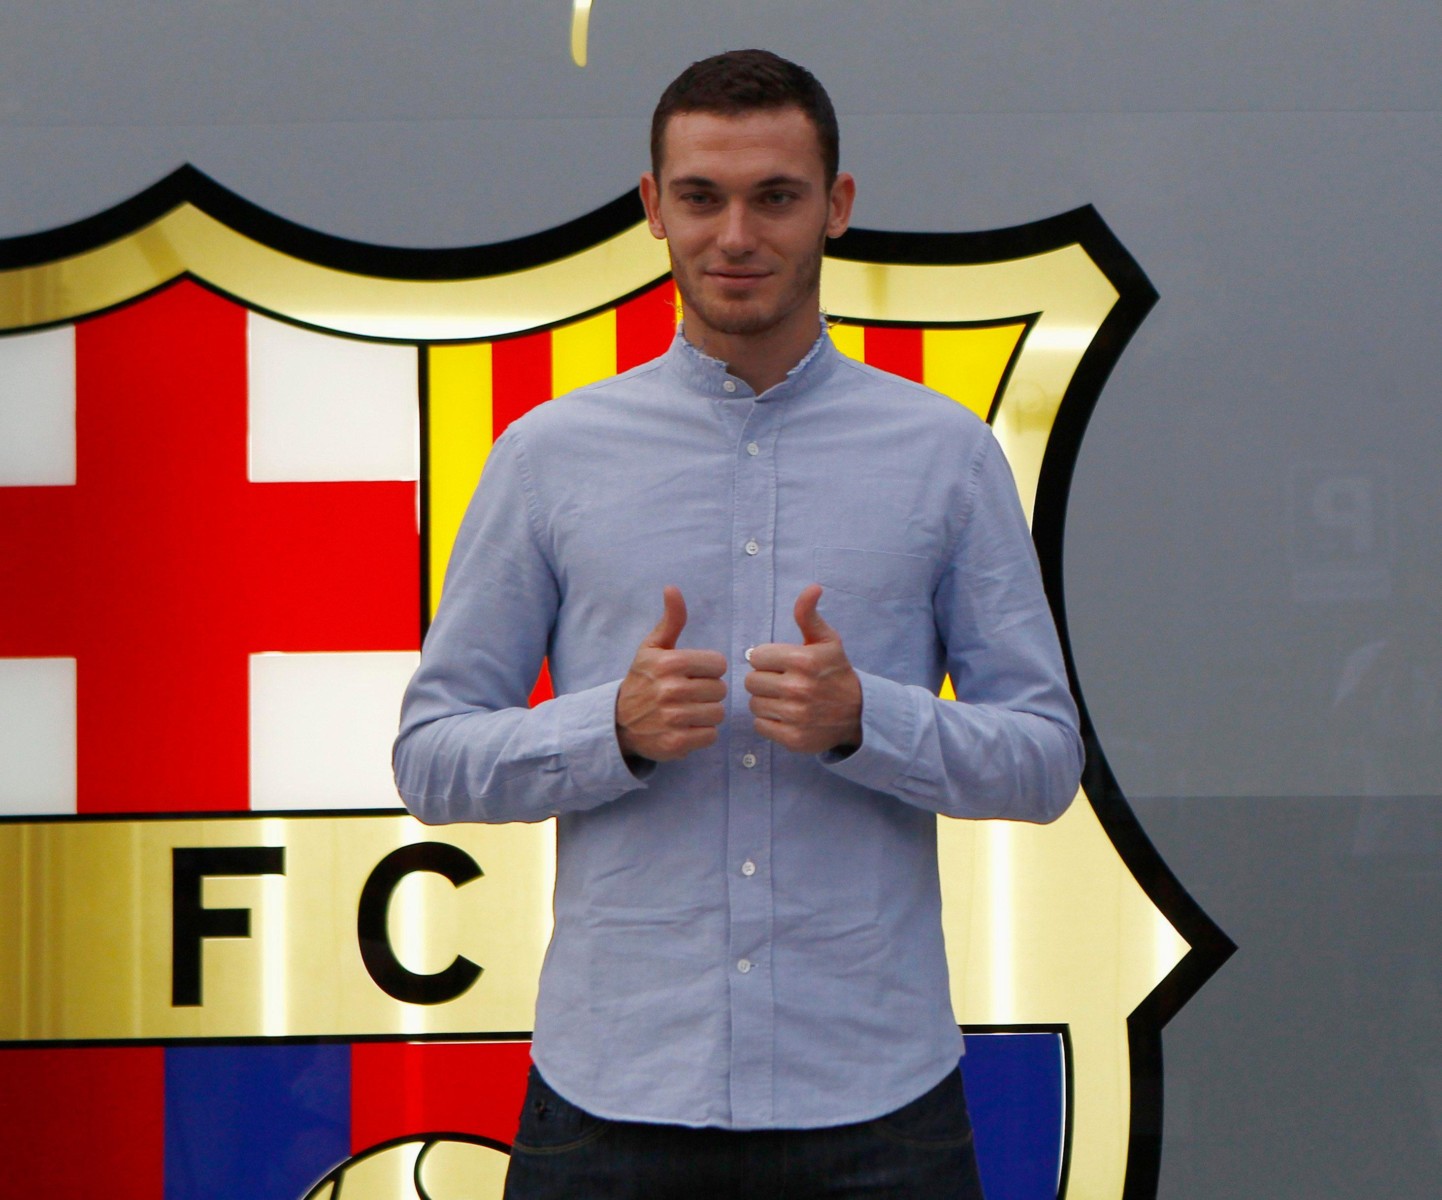 Vermaelen joined Barcelona from Arsenal in 2014 but has been cursed by injuries